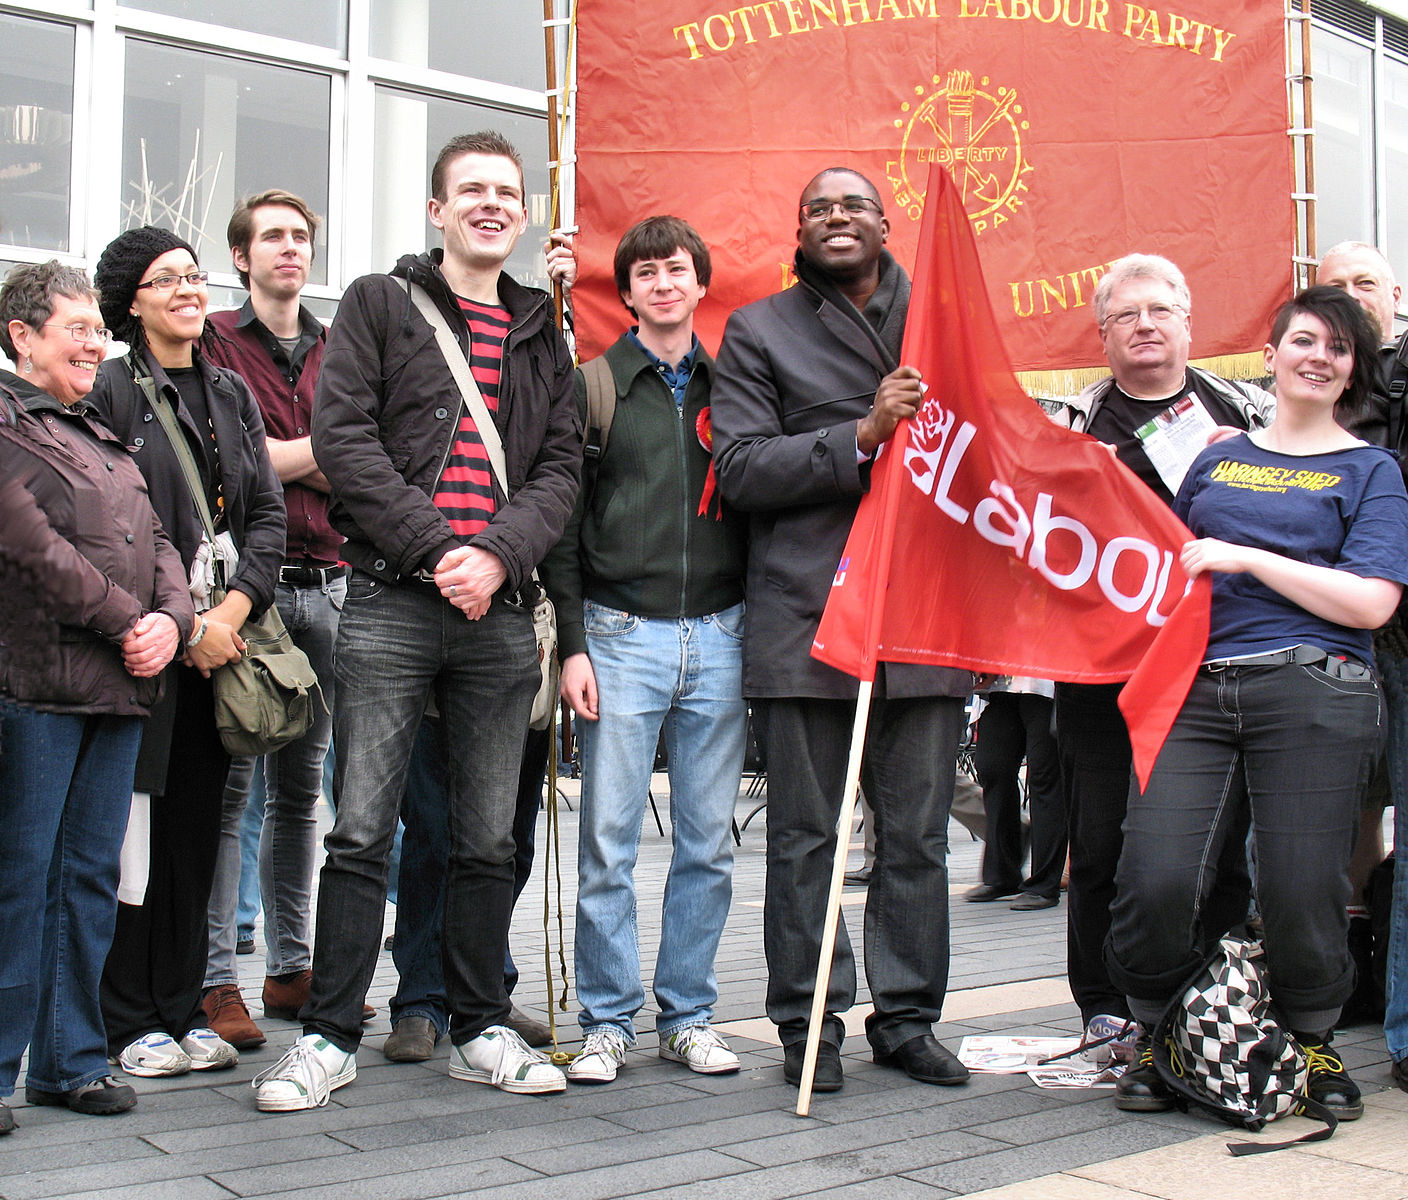 David Lammy standing in the center of a line of Labour Party supporters in London in front of a red brick wall and the Labour Party flag. 